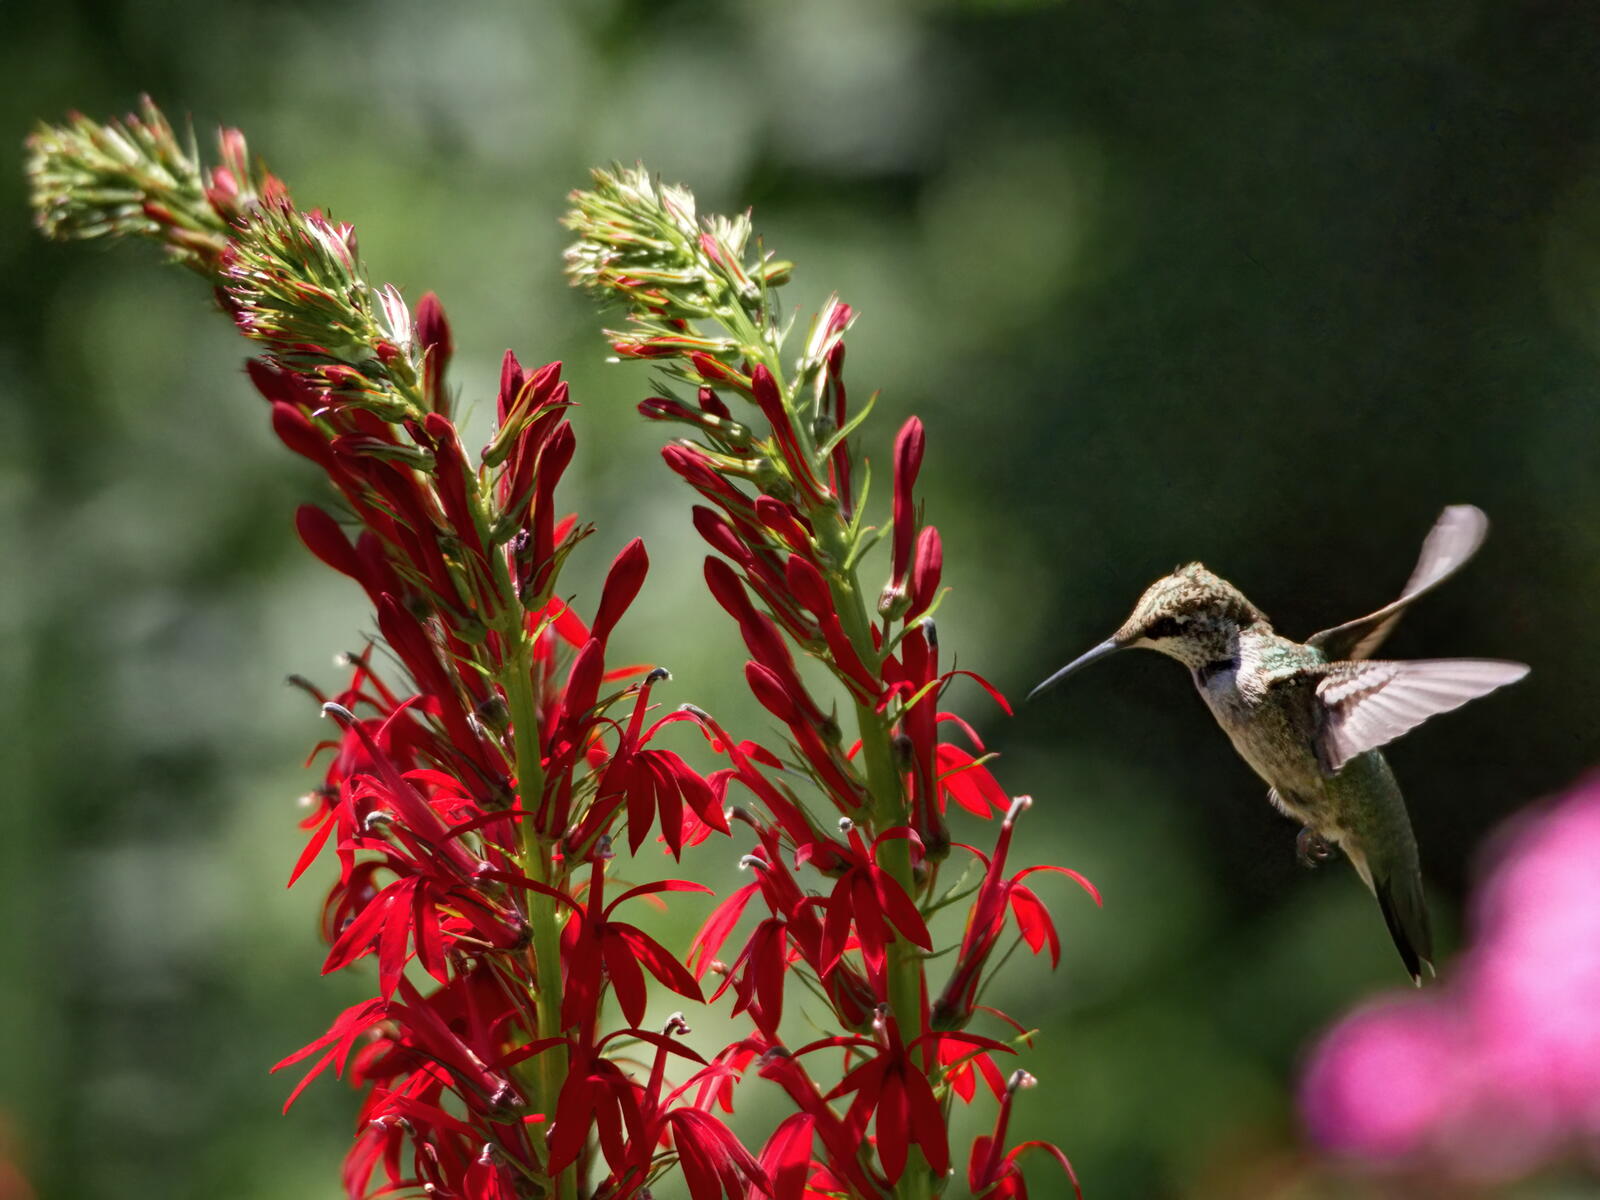 Free photo A hummingbird gathers nectar from a red flower.